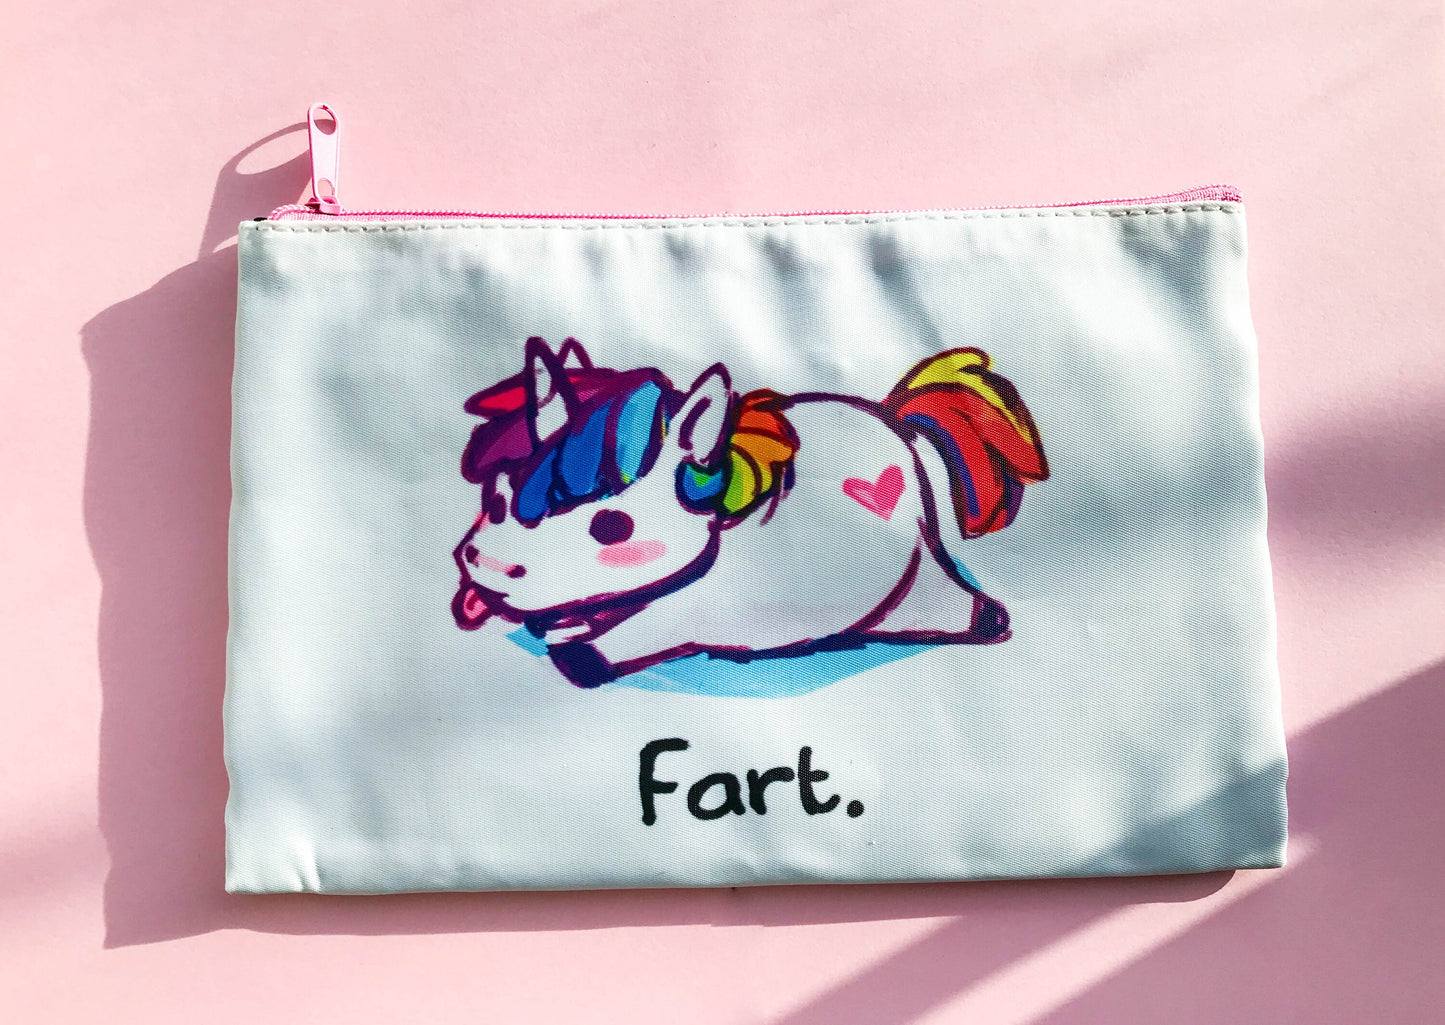 Unicorn Fart Pencil Case - Zipper Bag for Cosmetics or Stationery